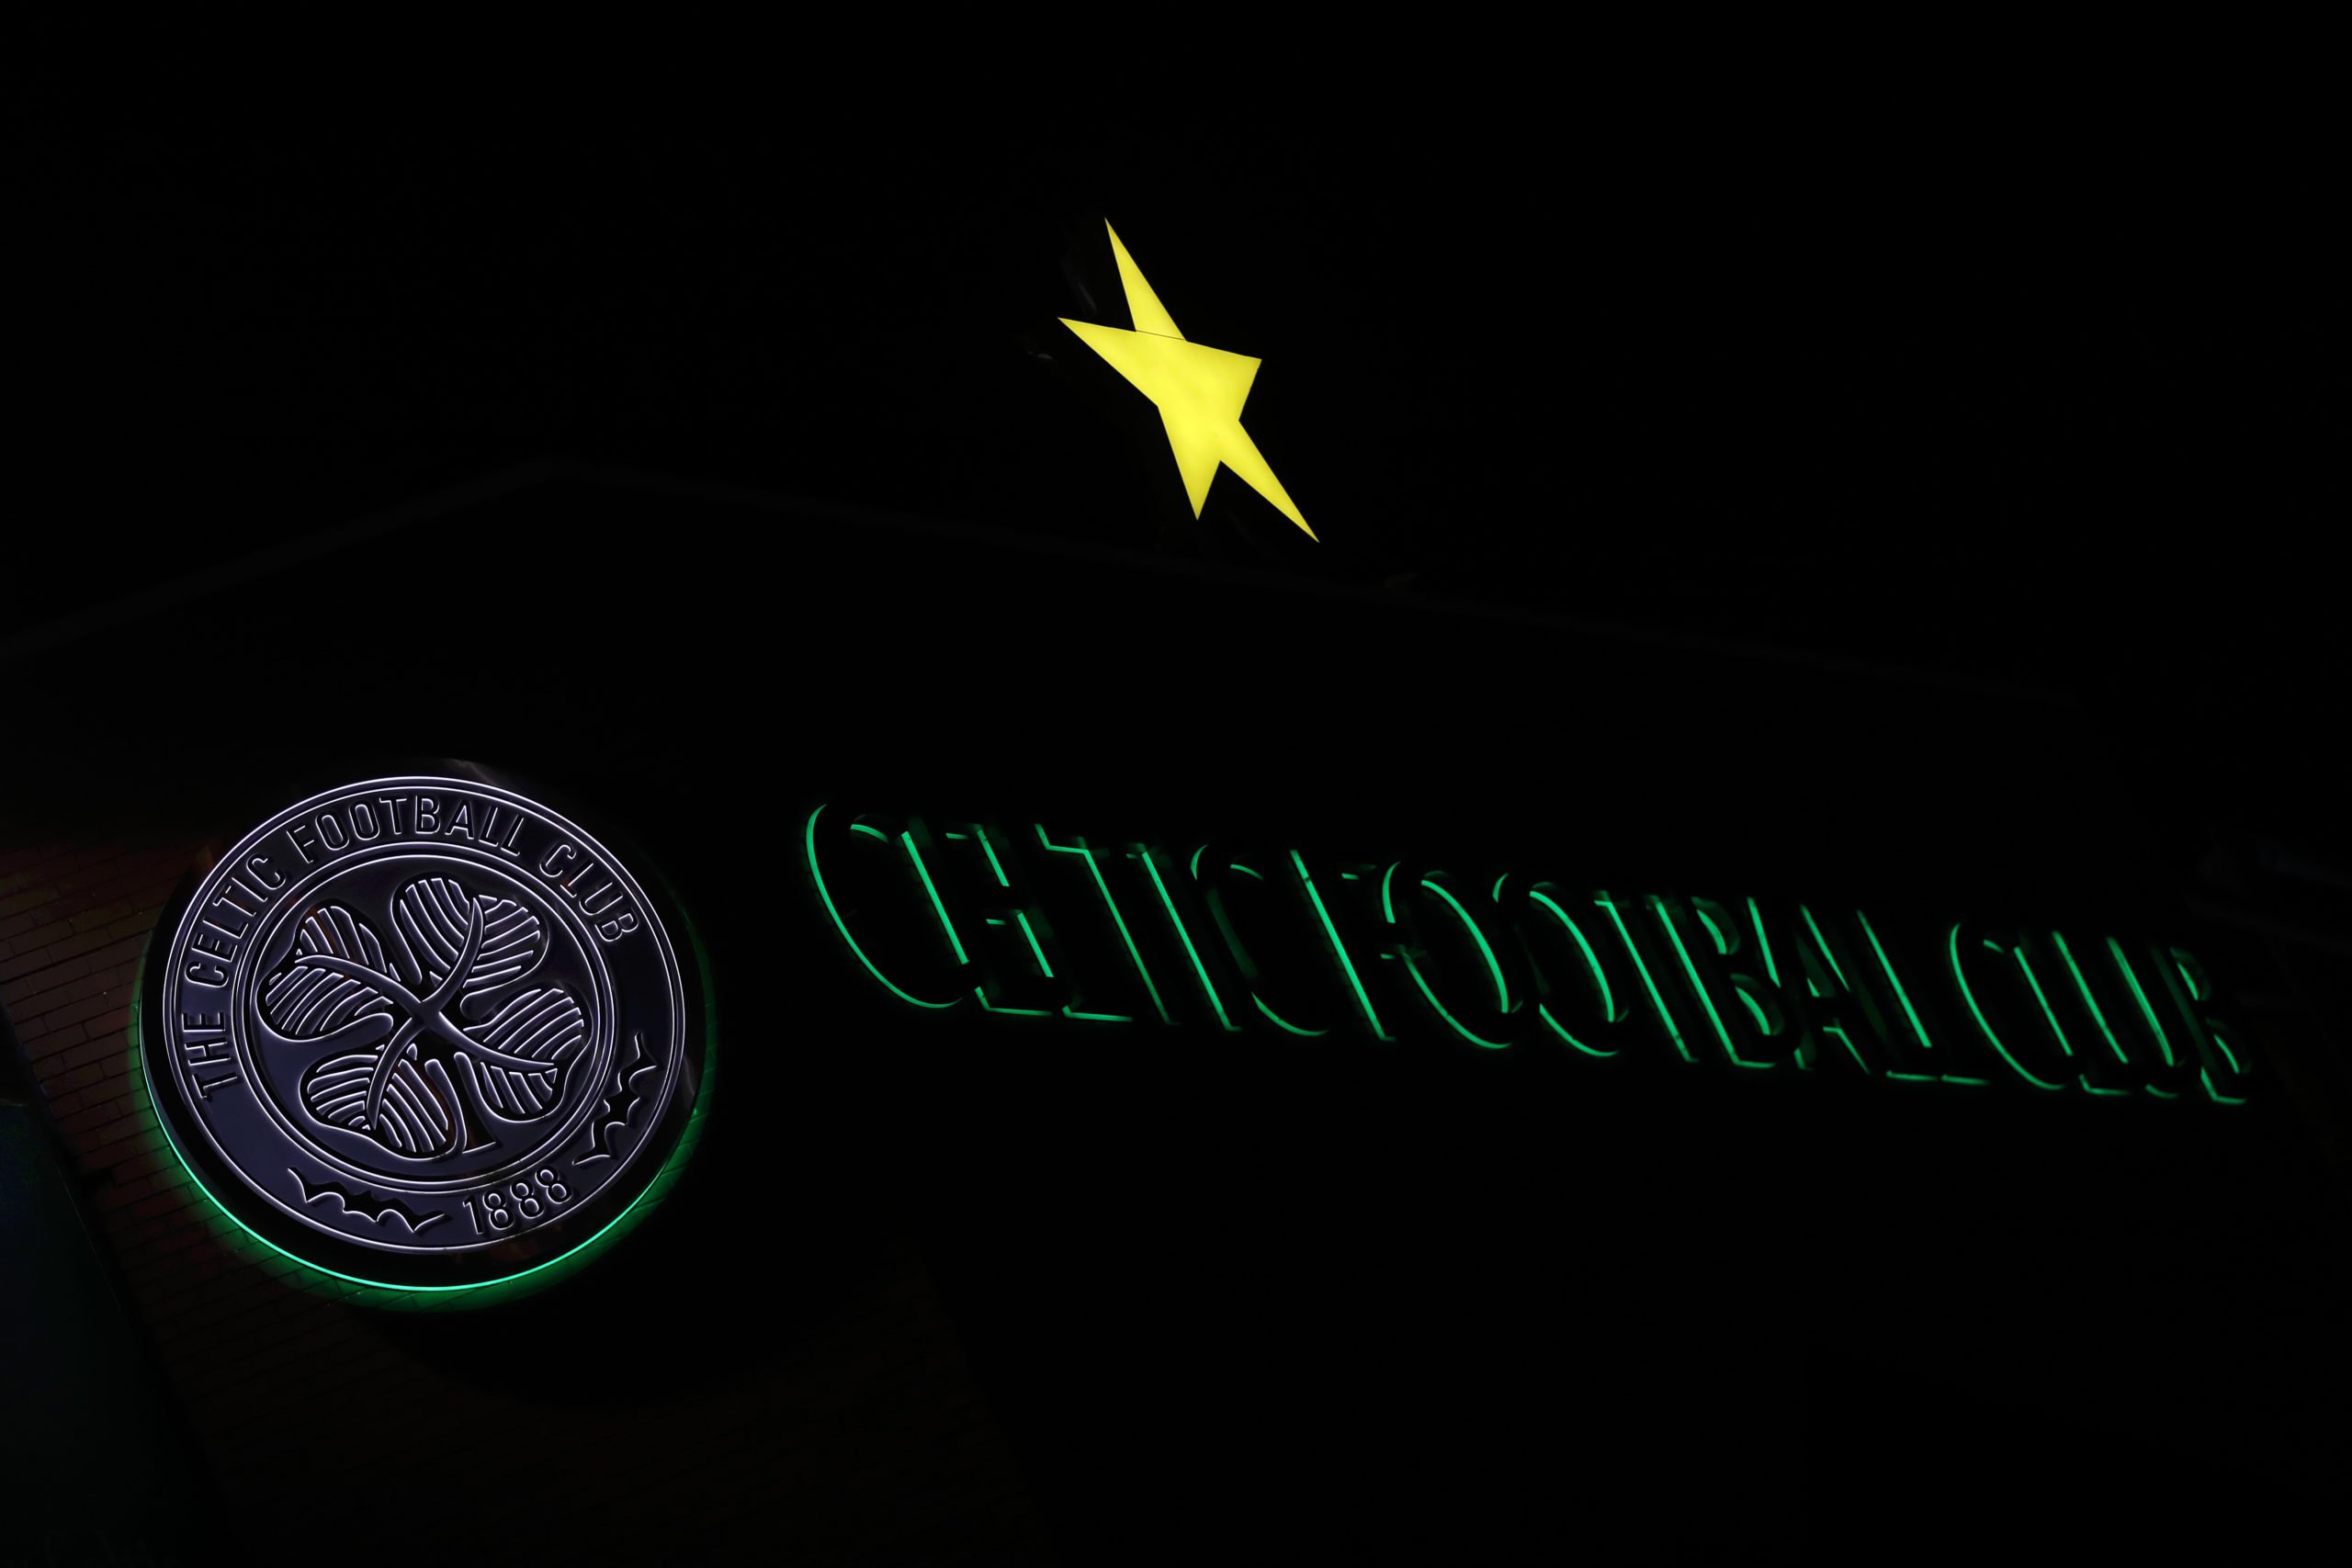 Celtic issue statement on "explosion and fire" at home of Peter Lawwell